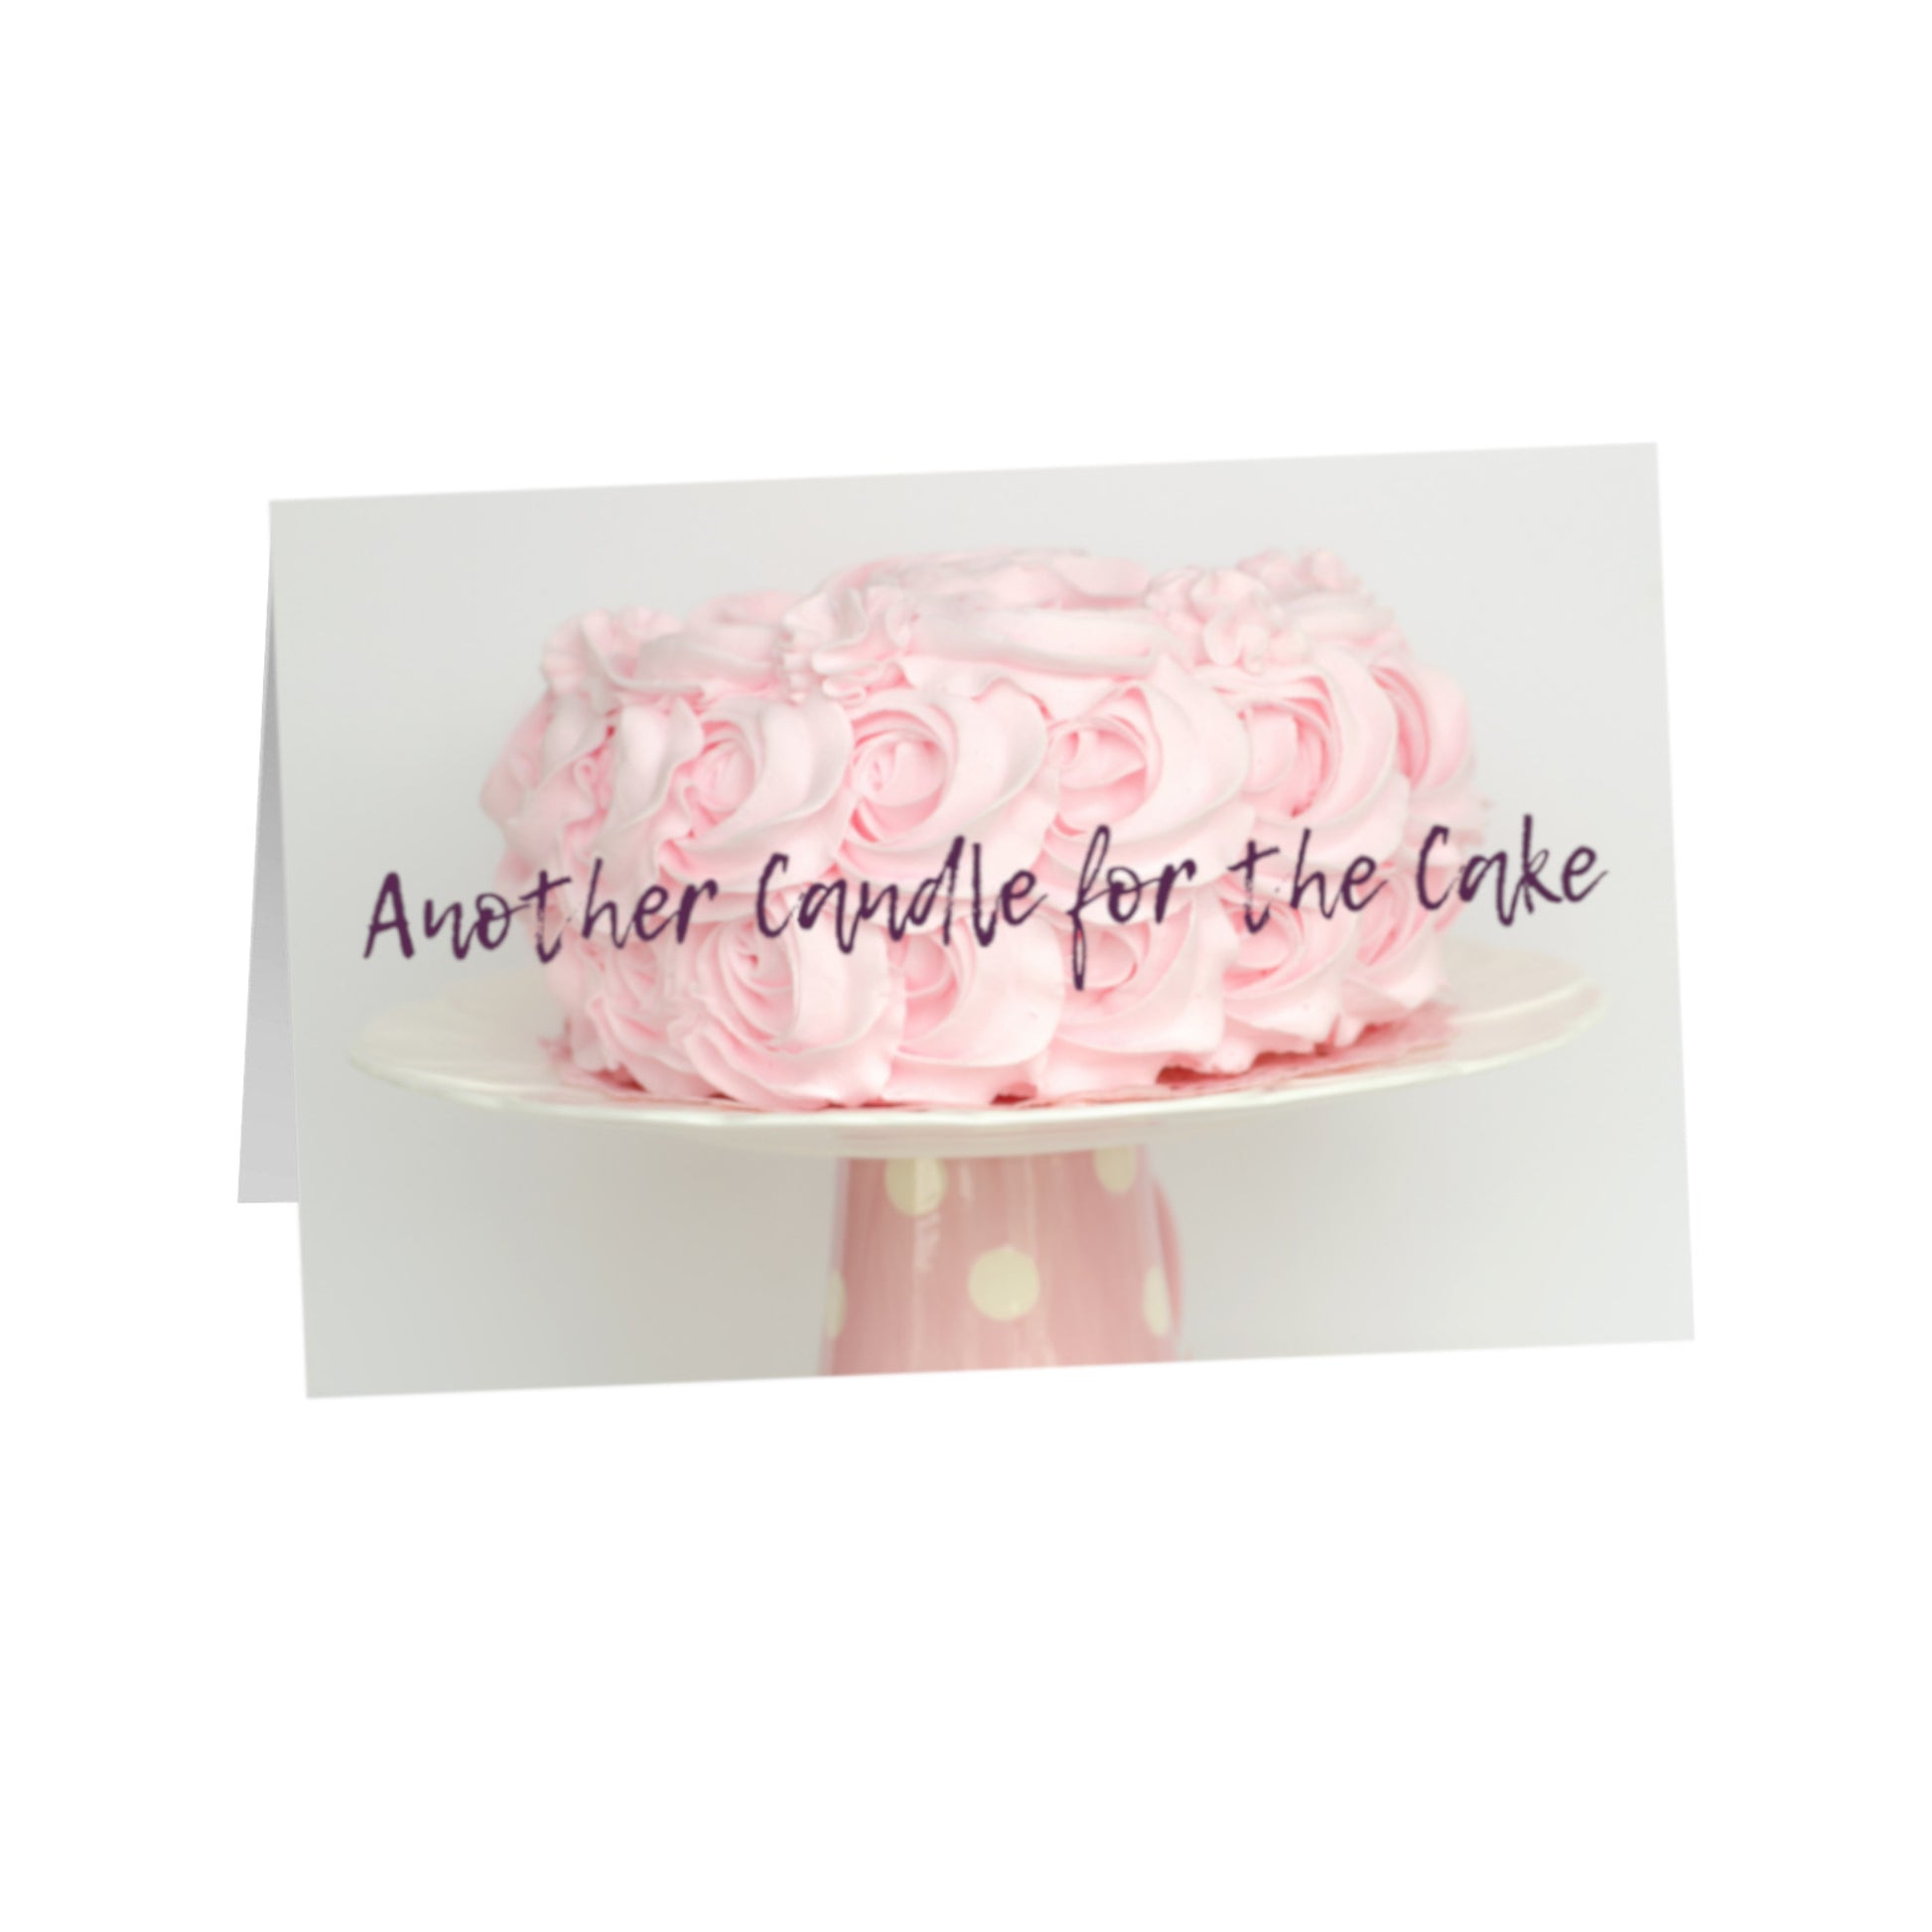 Another Candle for the Cake 8.5x5.5 Greeting Card